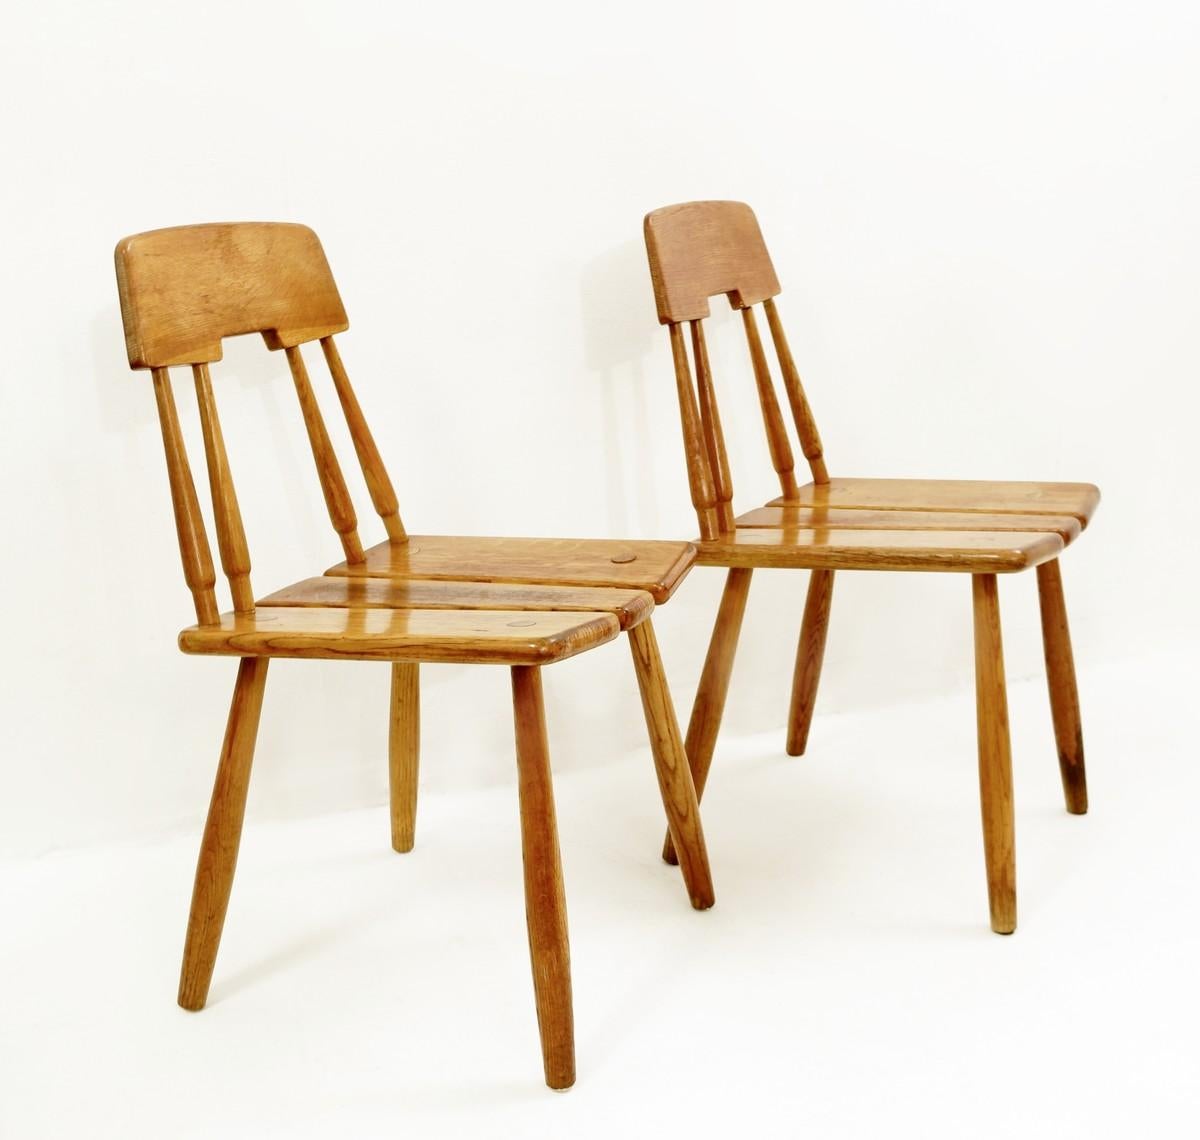 Carl-Gustav Boulogner chairs in oak. Produced by AB Bröderna Wigells stolfabrik. 1950s a pair available
Sold par piece